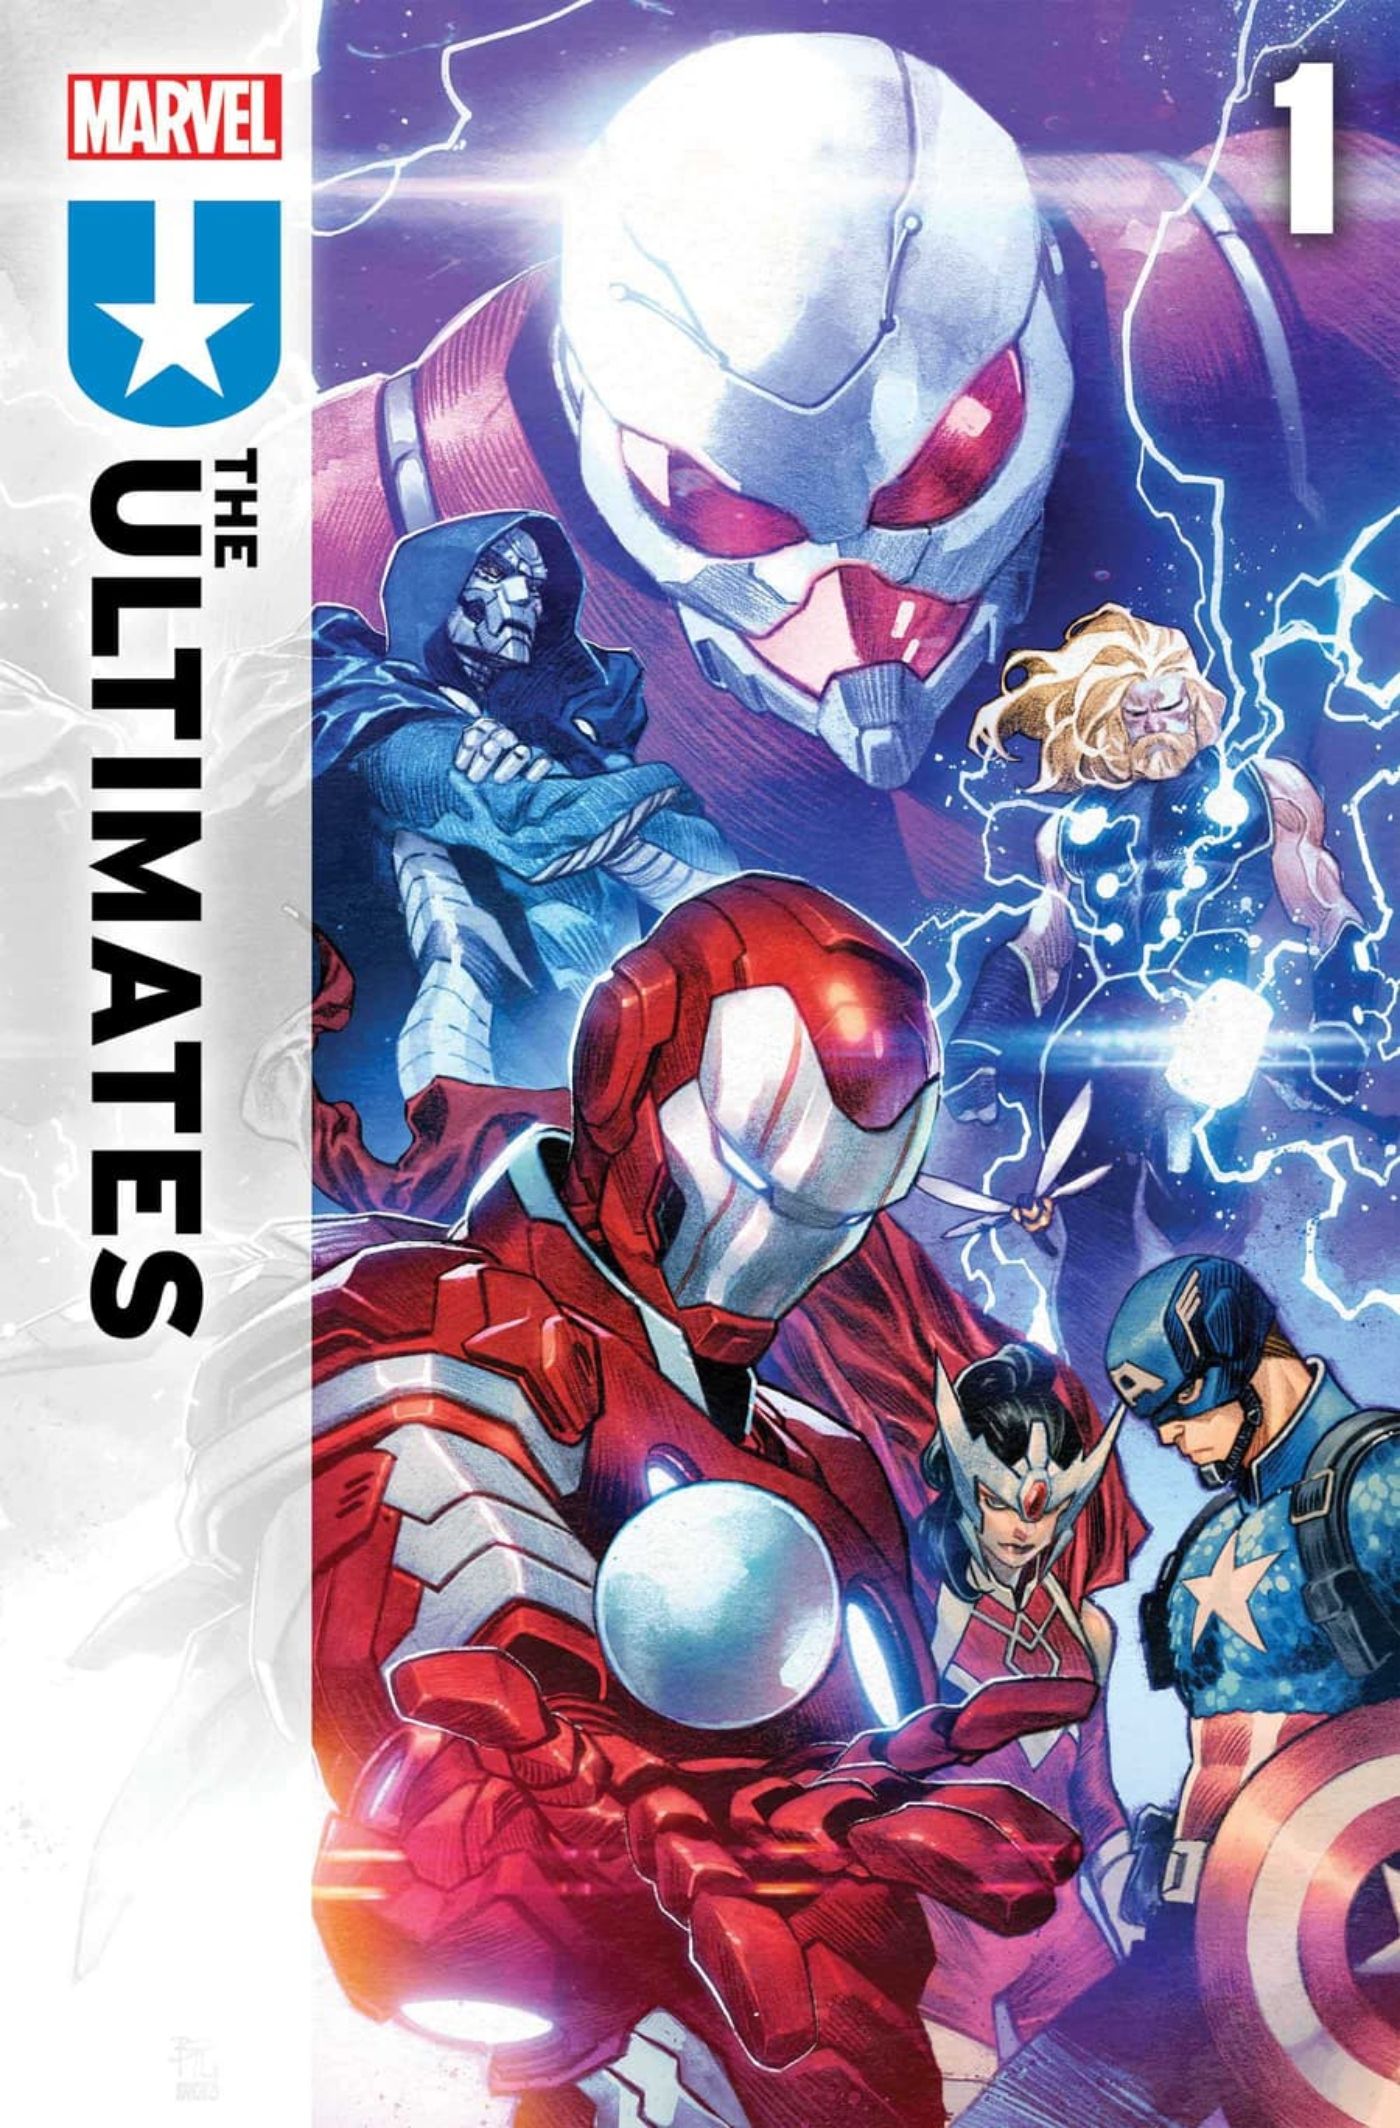 The Ultimates #1 comic cover featuring the Ultimates.